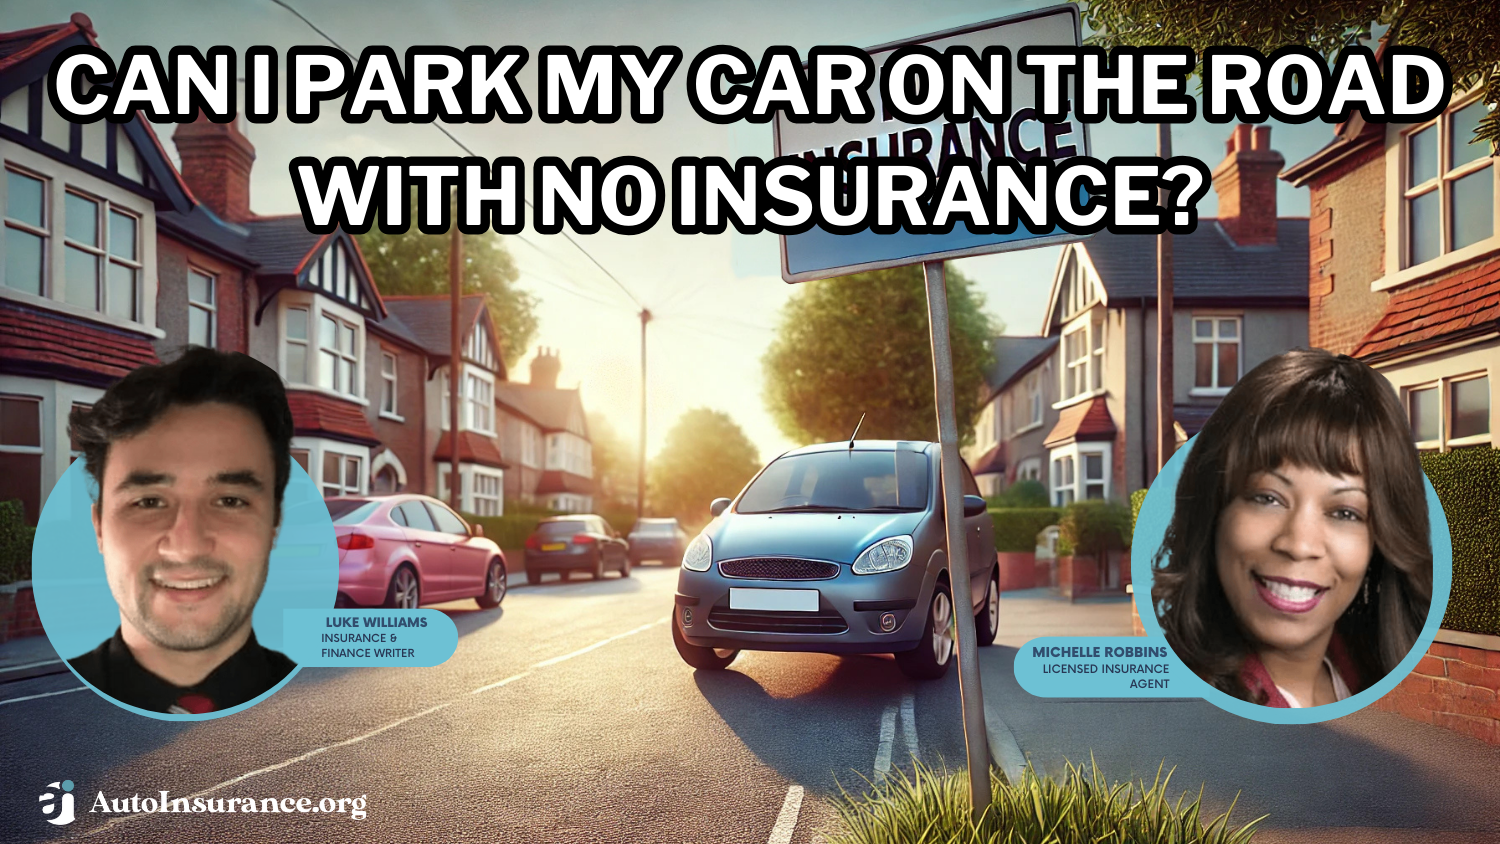 Can I park my car on the road with no insurance?